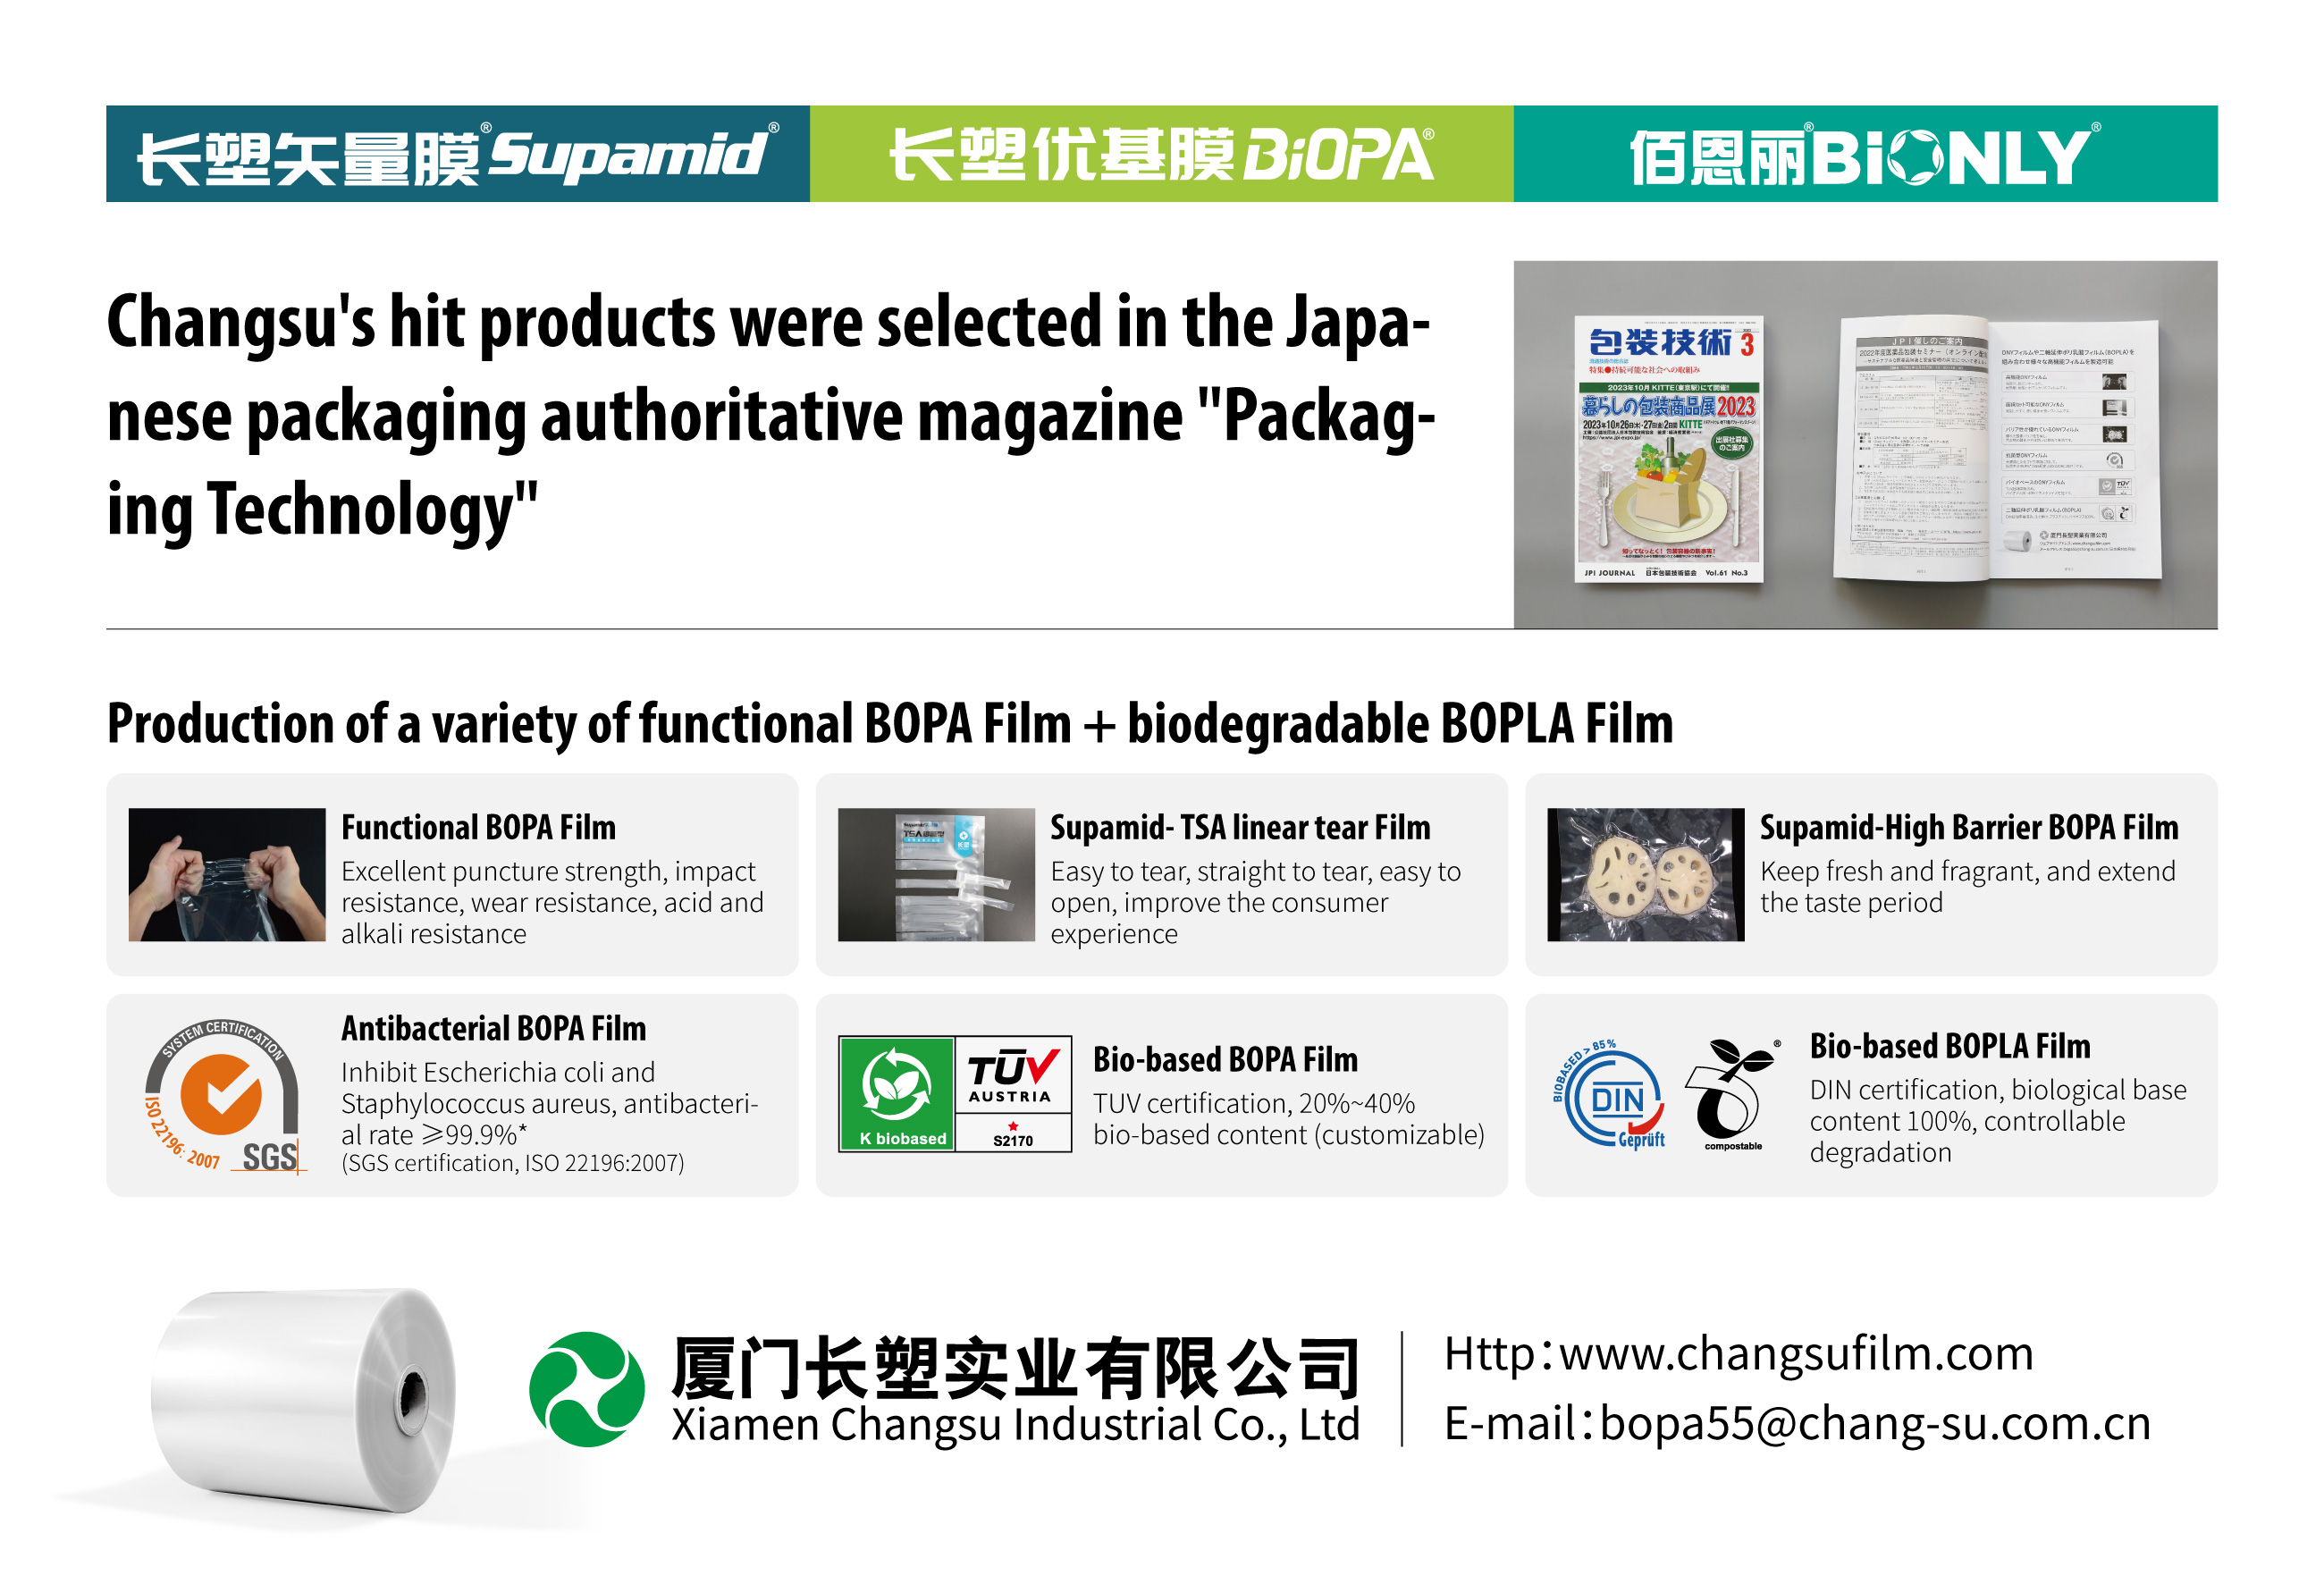 Changsu’s hit products were selected in the Japanese packaging authoritative magazine “Packaging Technology”